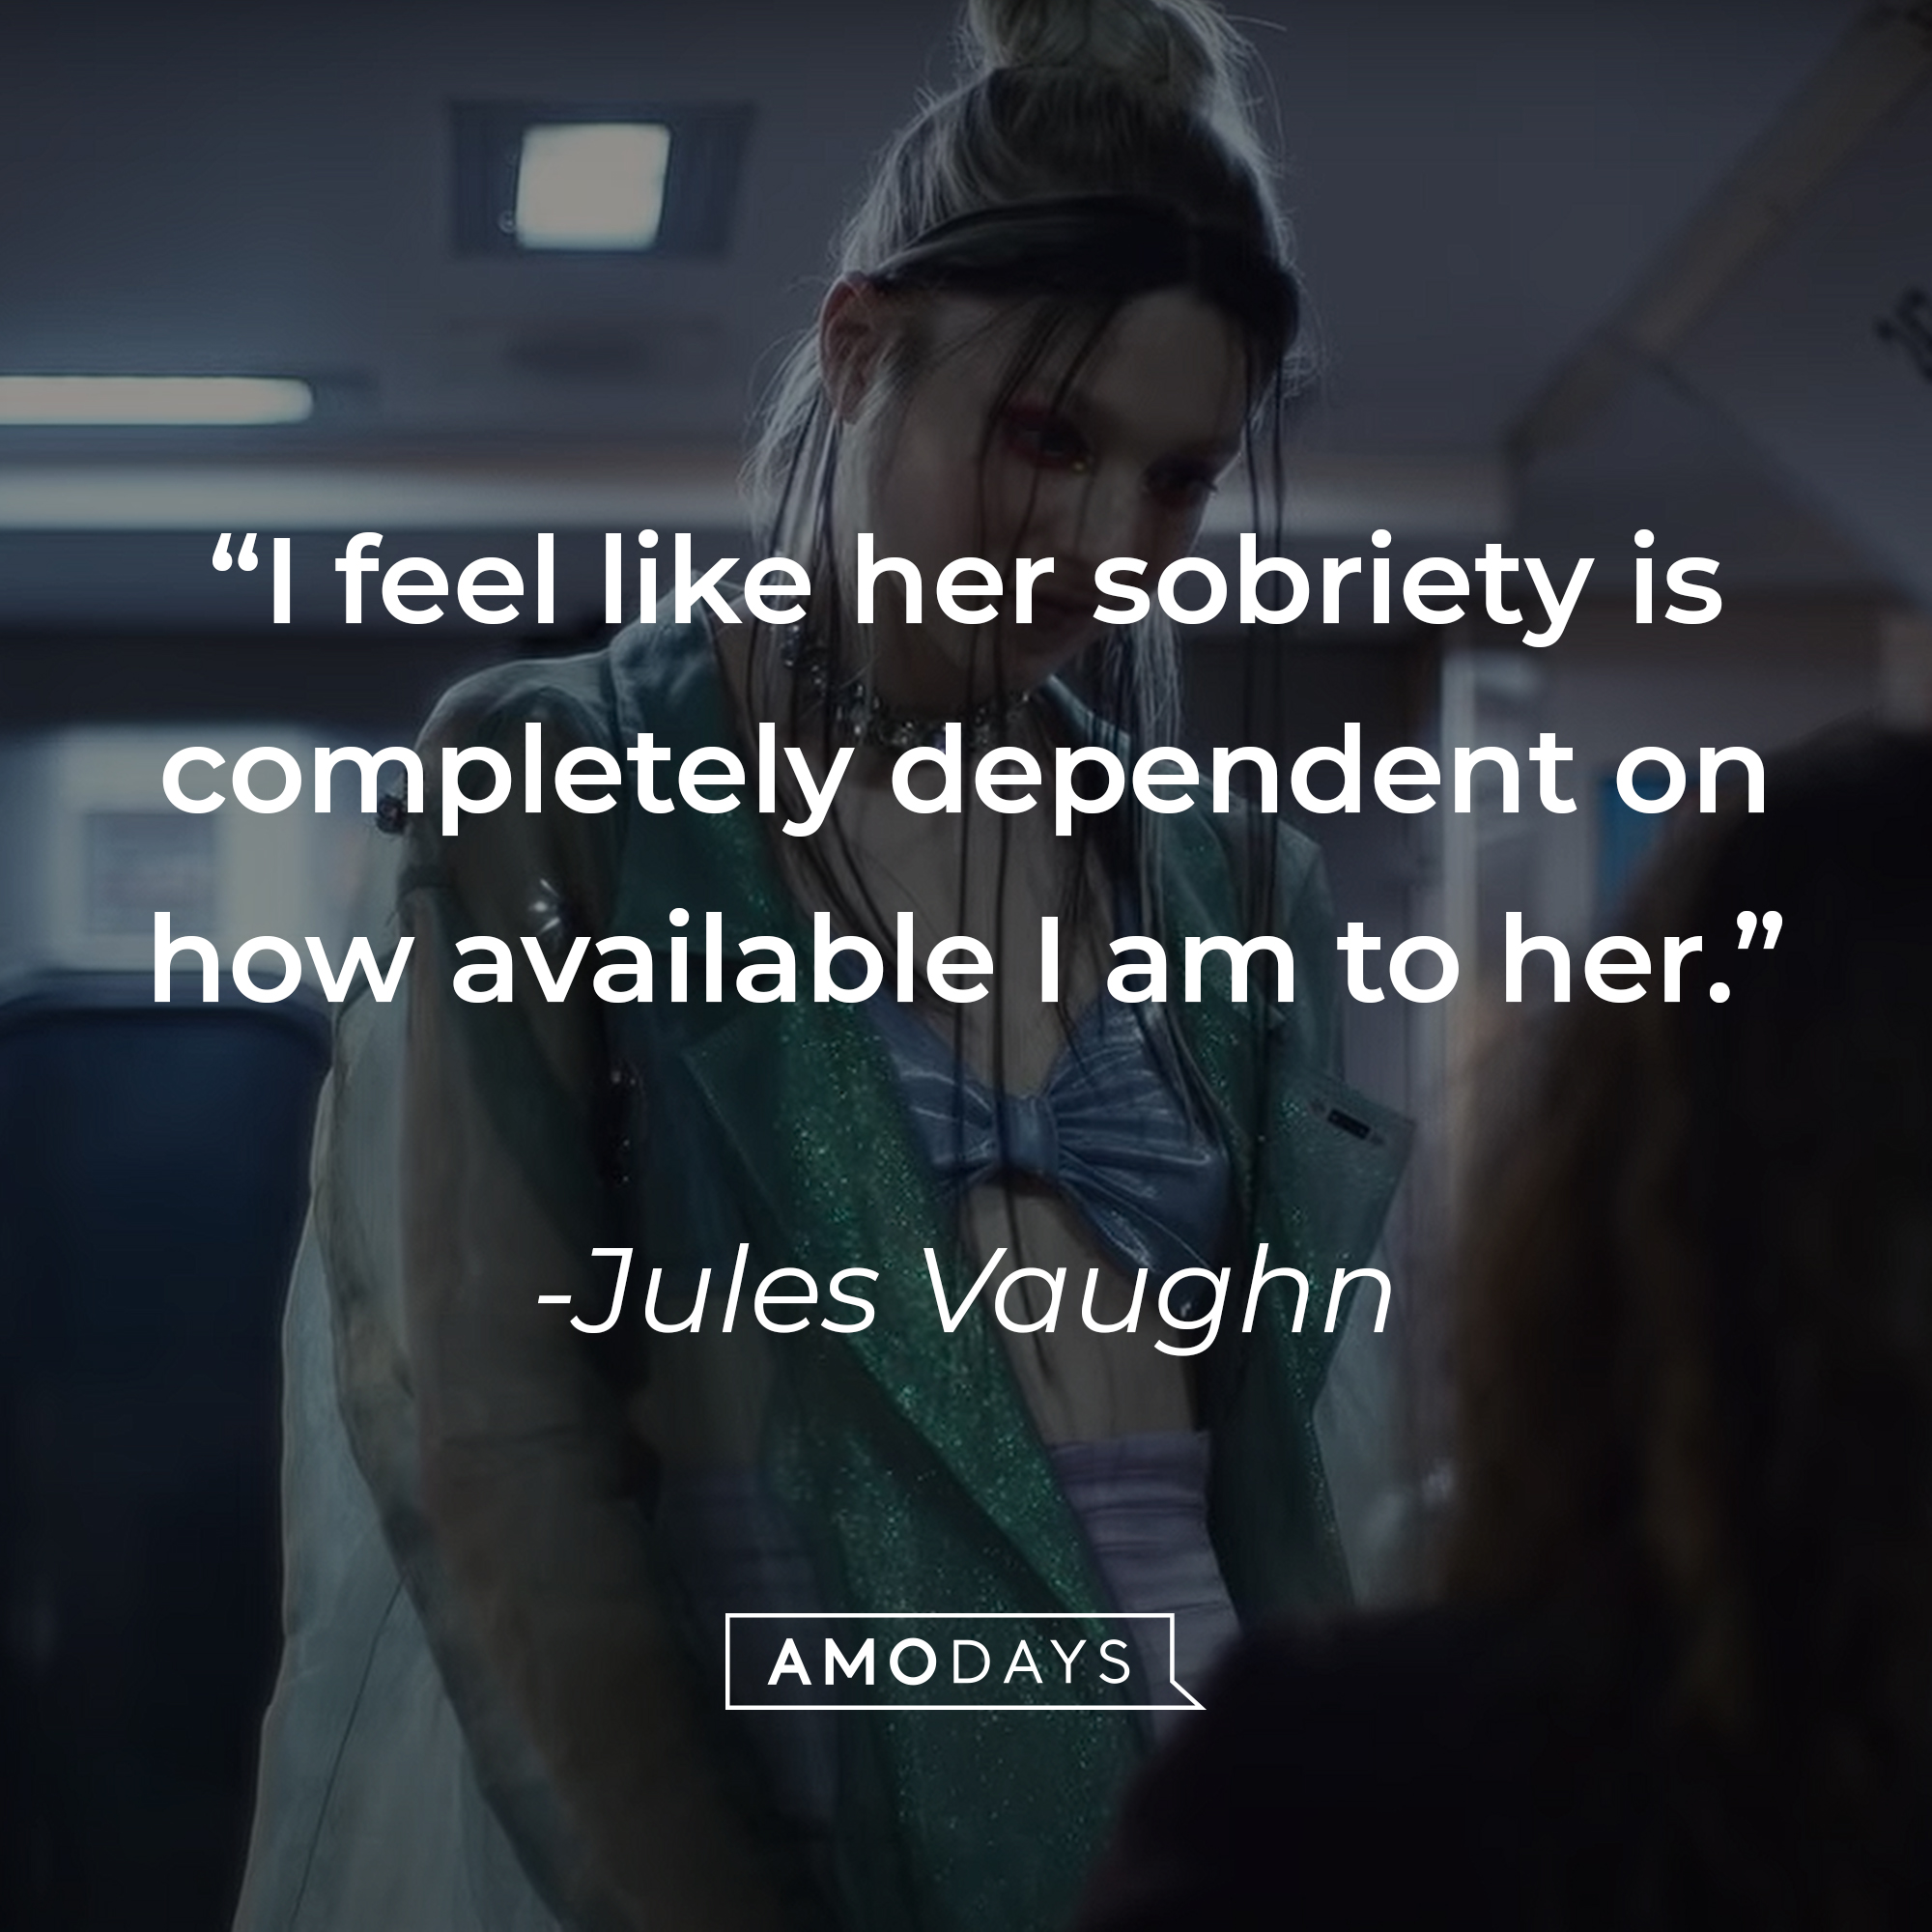 Jules Vaughn with her quote: "I feel like her sobriety is completely dependent on how available I am to her." | Source: HBO